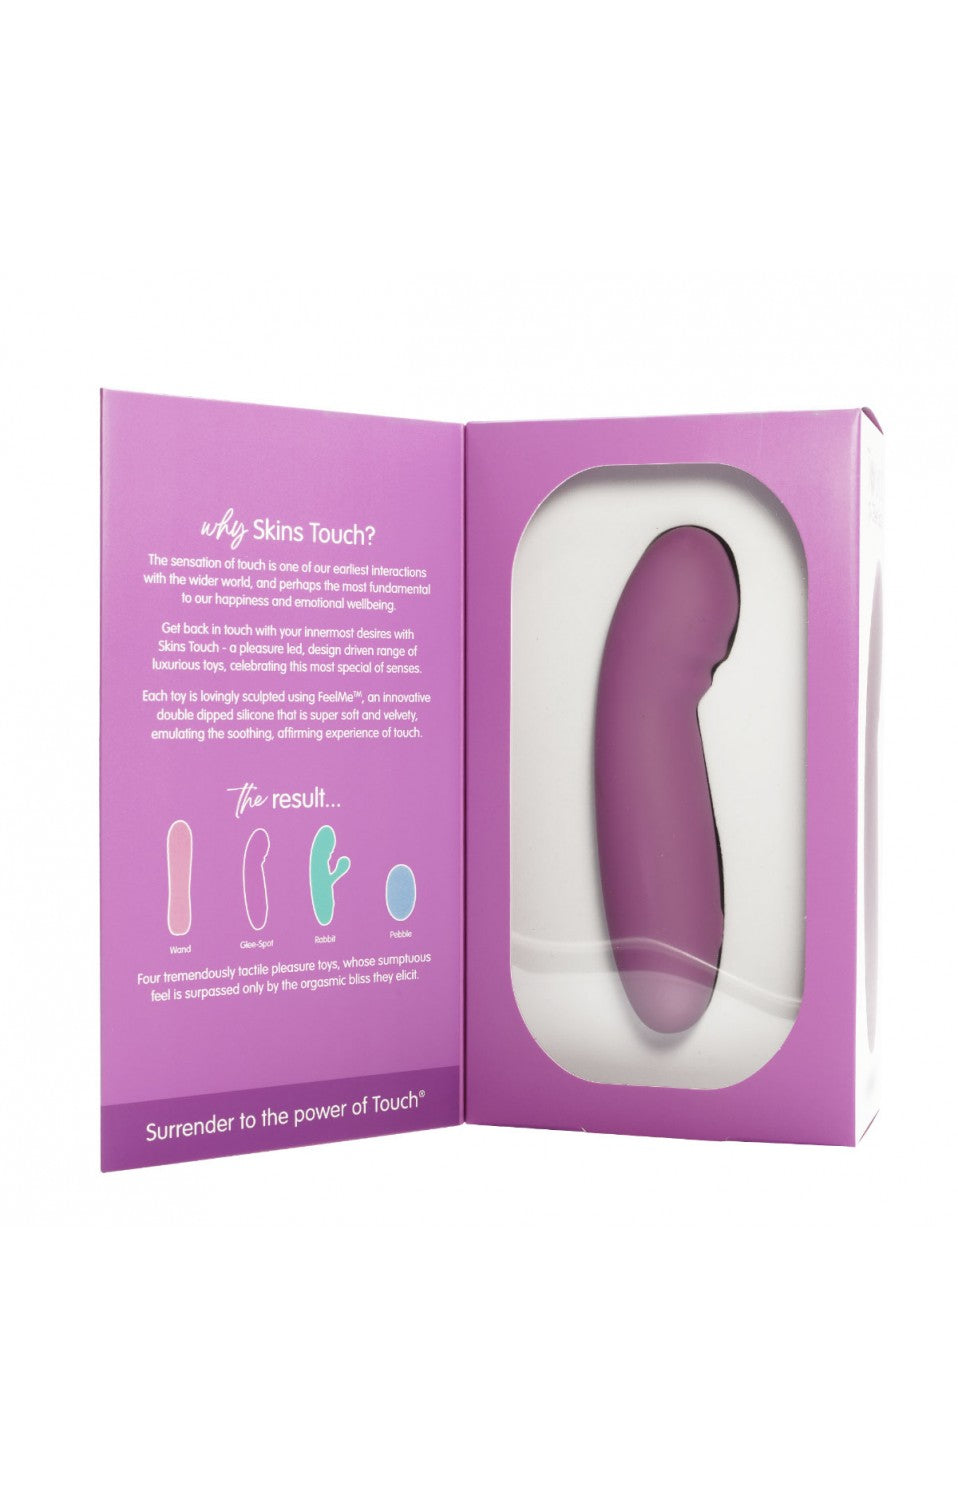 The Skins Touch The Glee Spot Vibrator inside its packaging with front flap open.